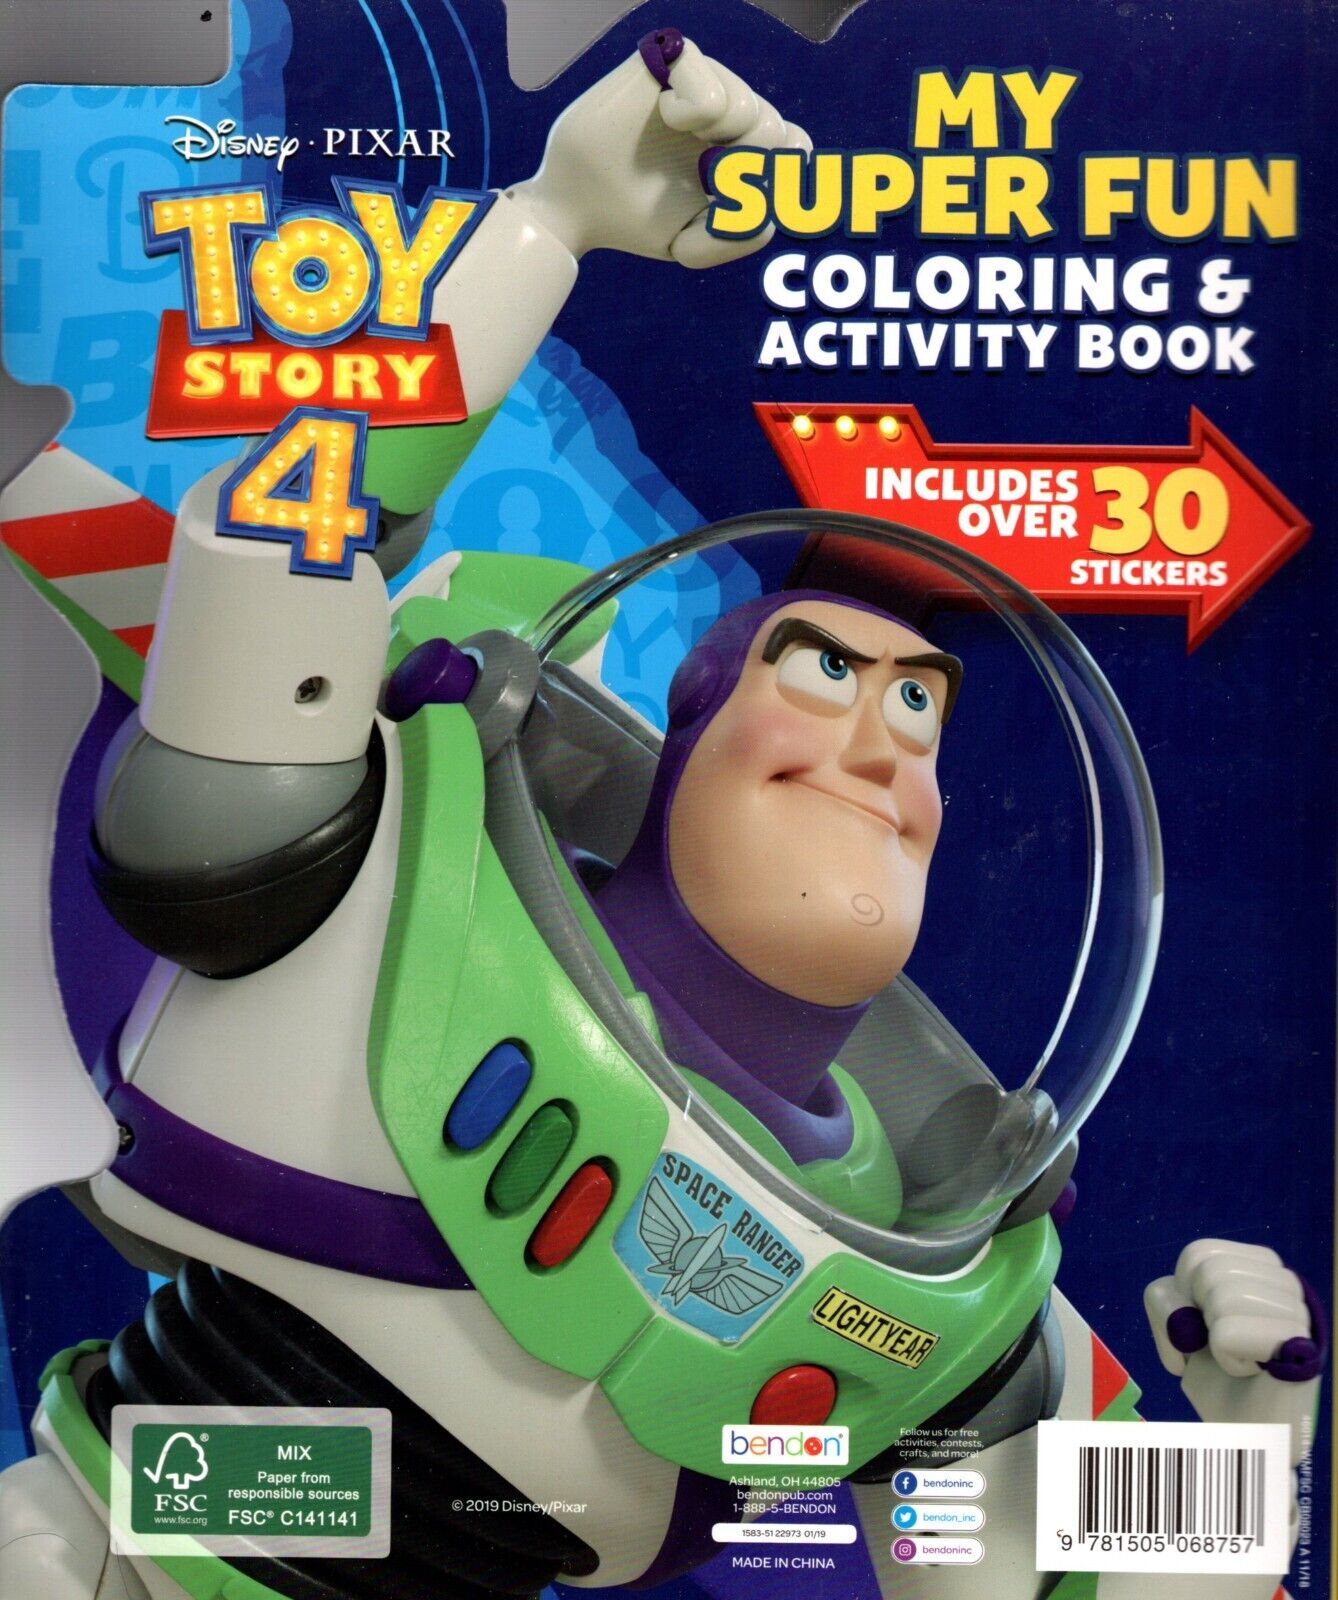 Toy Story 4 - My super Fun - Coloring & Activity Book Includes Over 30 Stickers